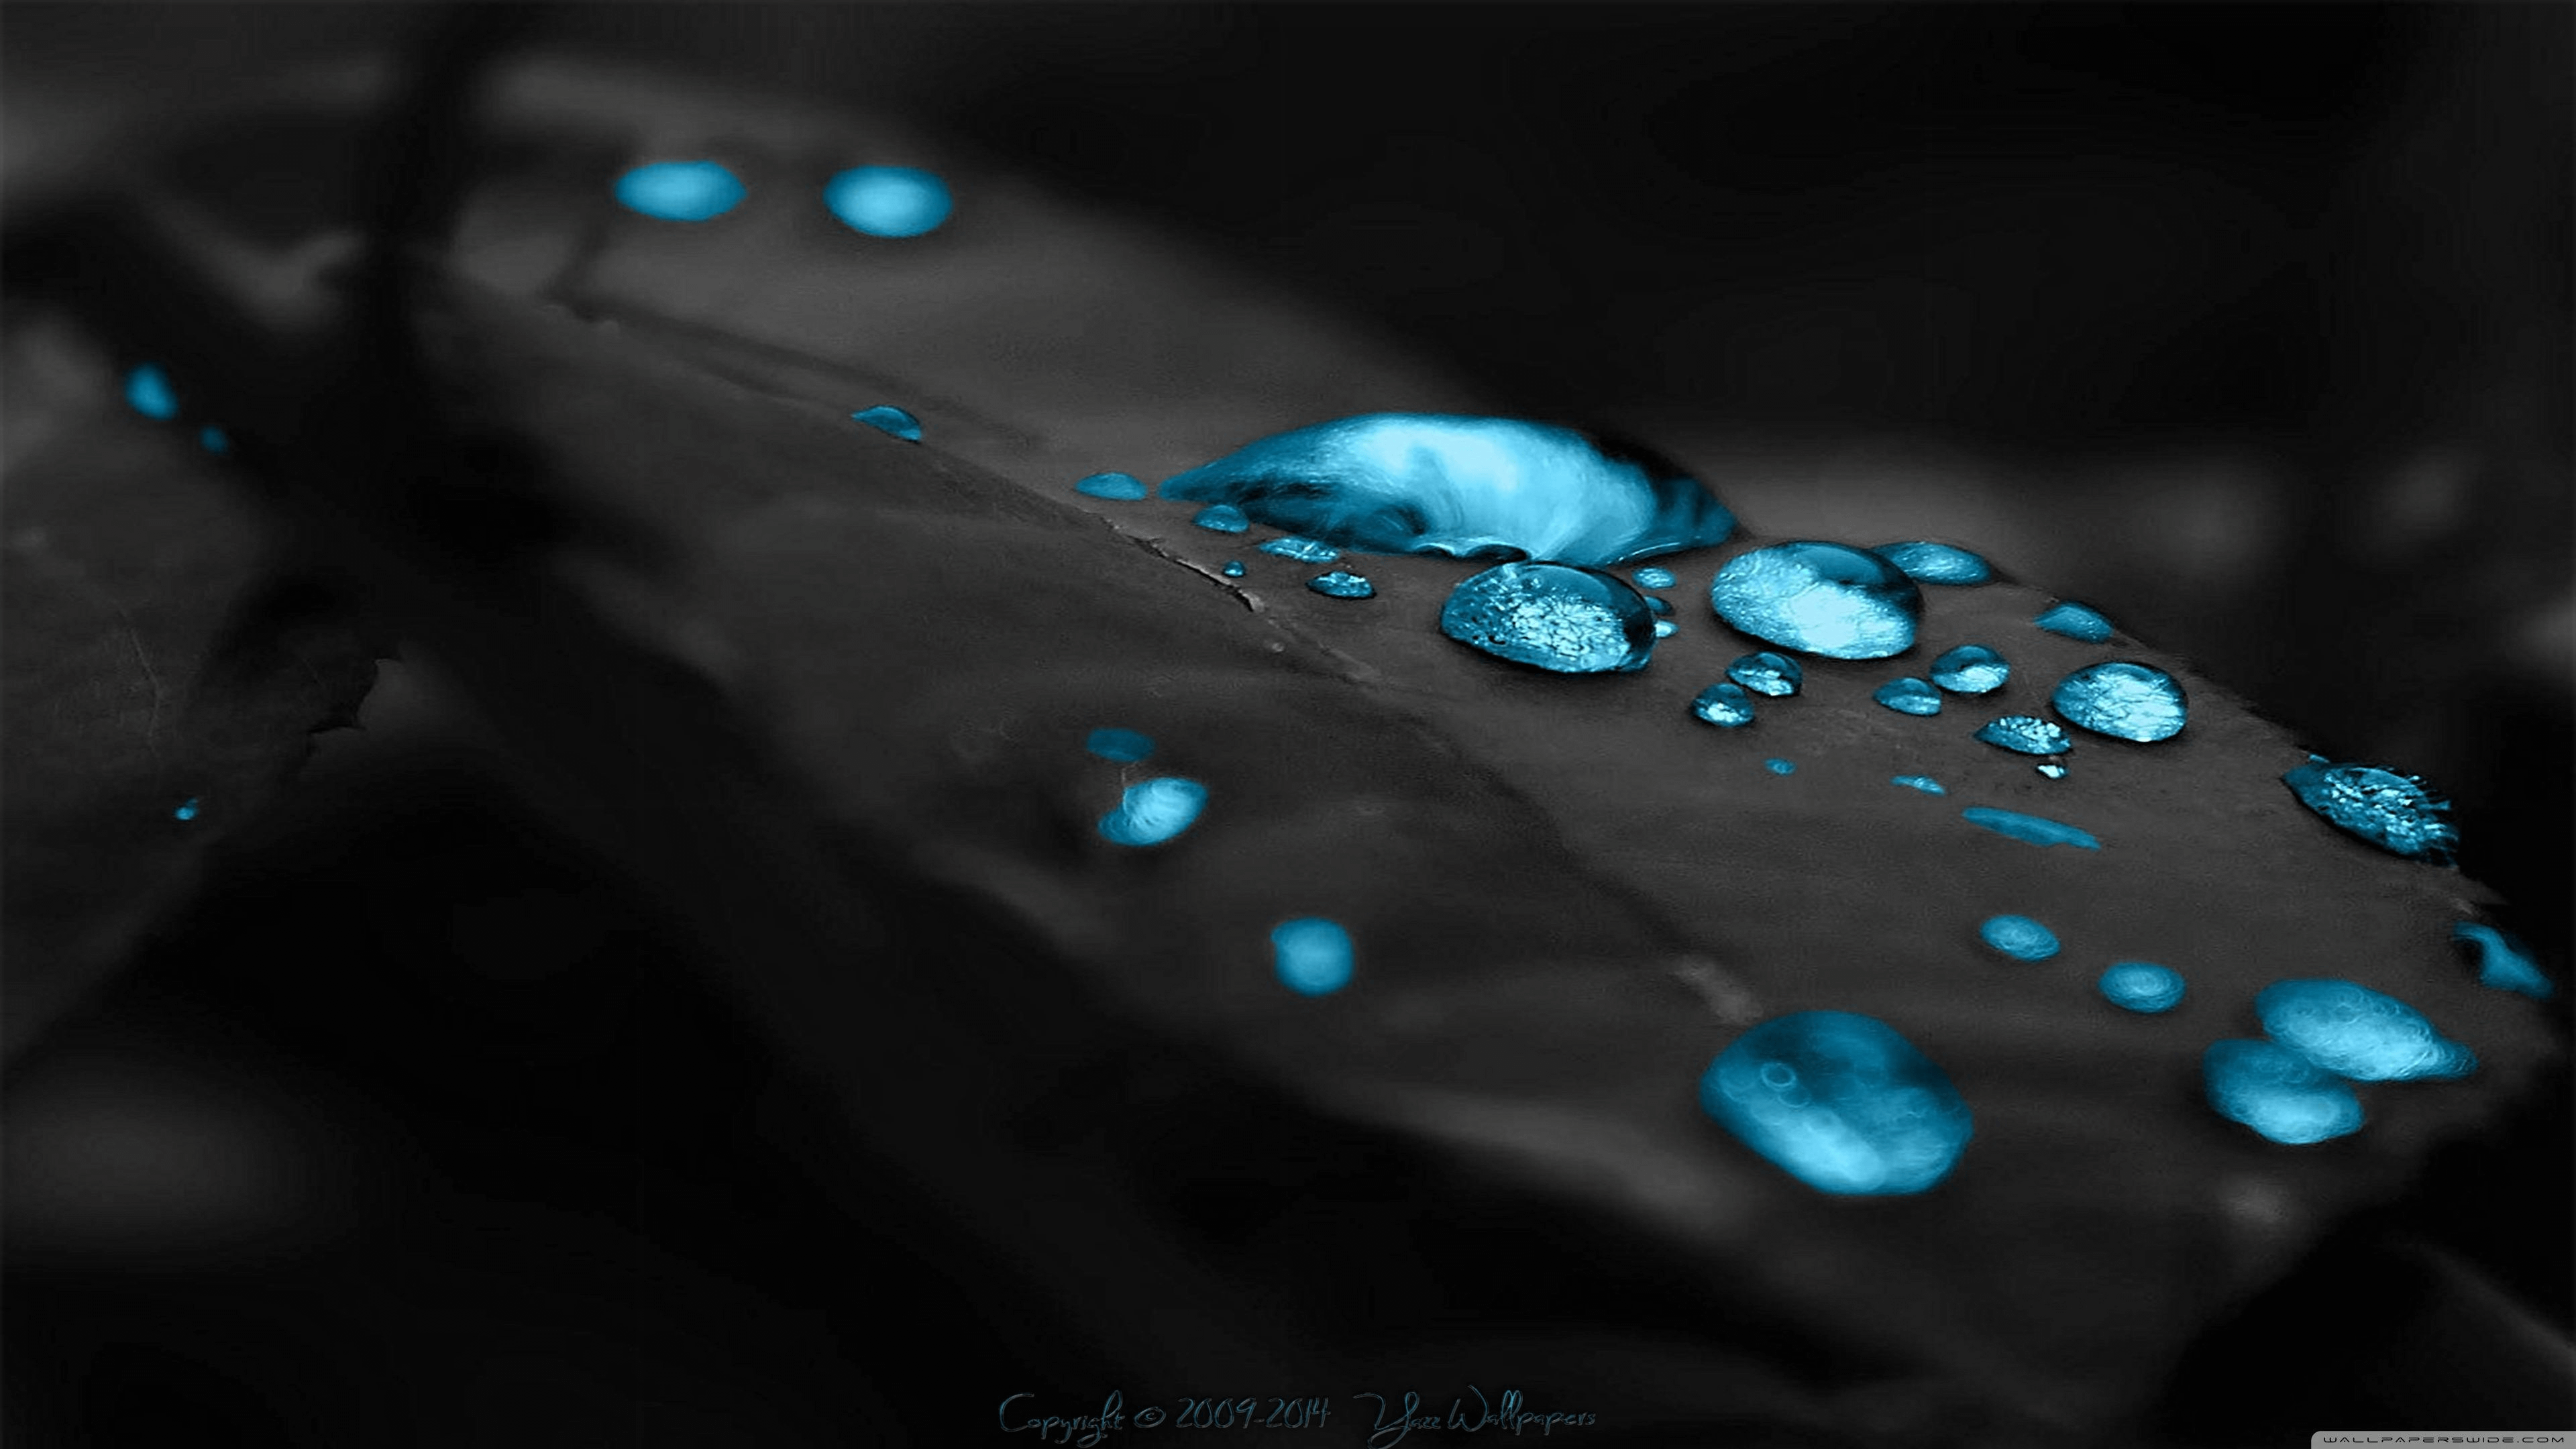 Blue drops on a leaf wallpaper - Nature wallpapers - #33200 - Glossy